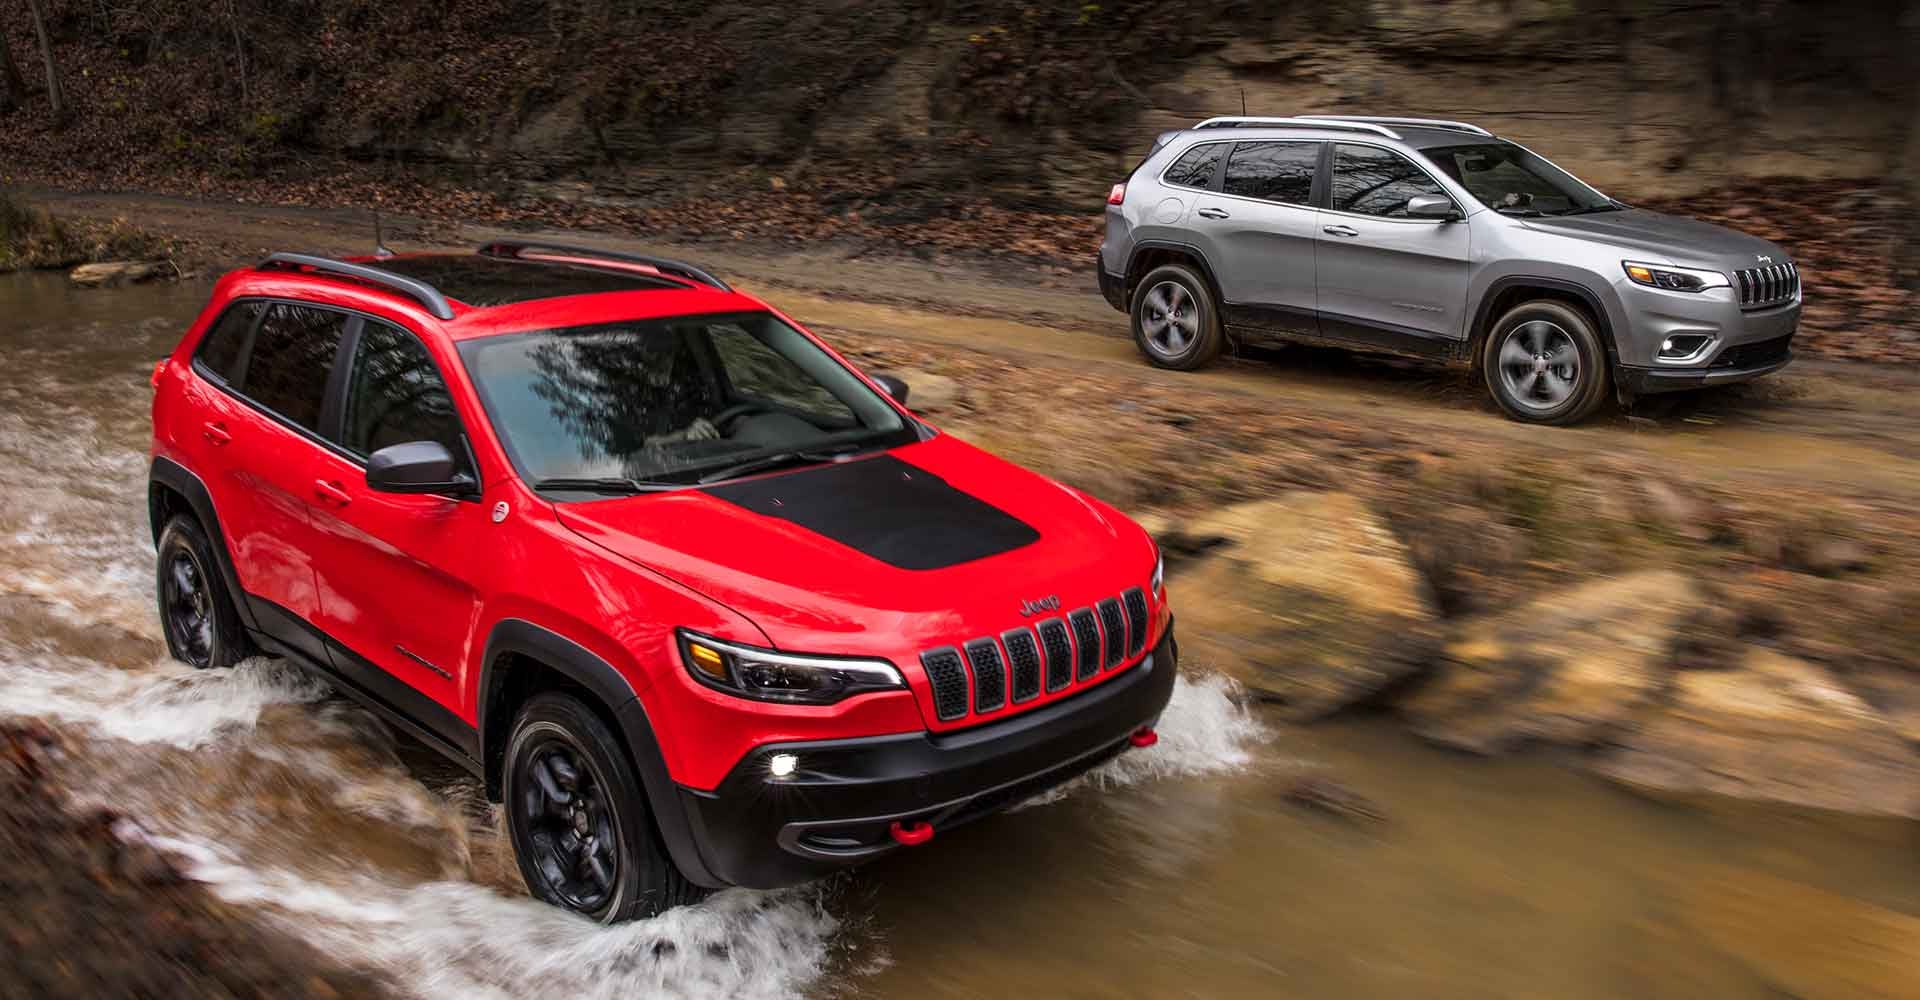 2021 Jeep Cherokee review